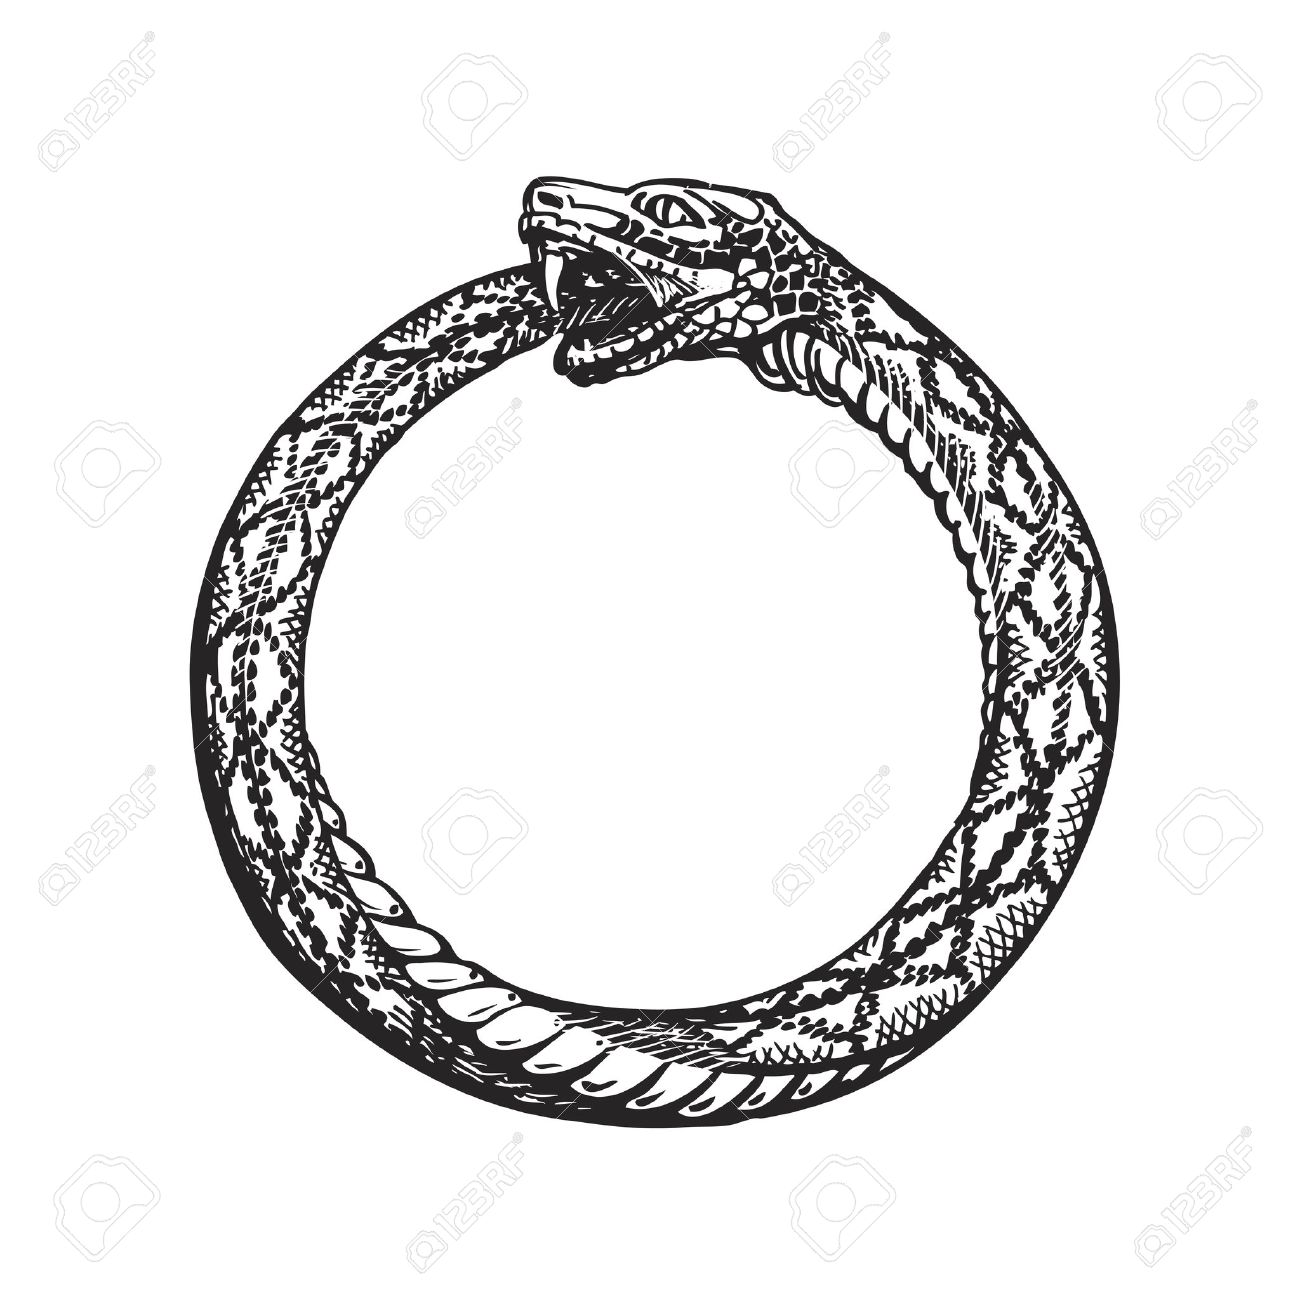 67209558-ouroboros-snake-eating-its-own-tail-eternity-or-infinity-symbol-isolated-on-white-background.jpg